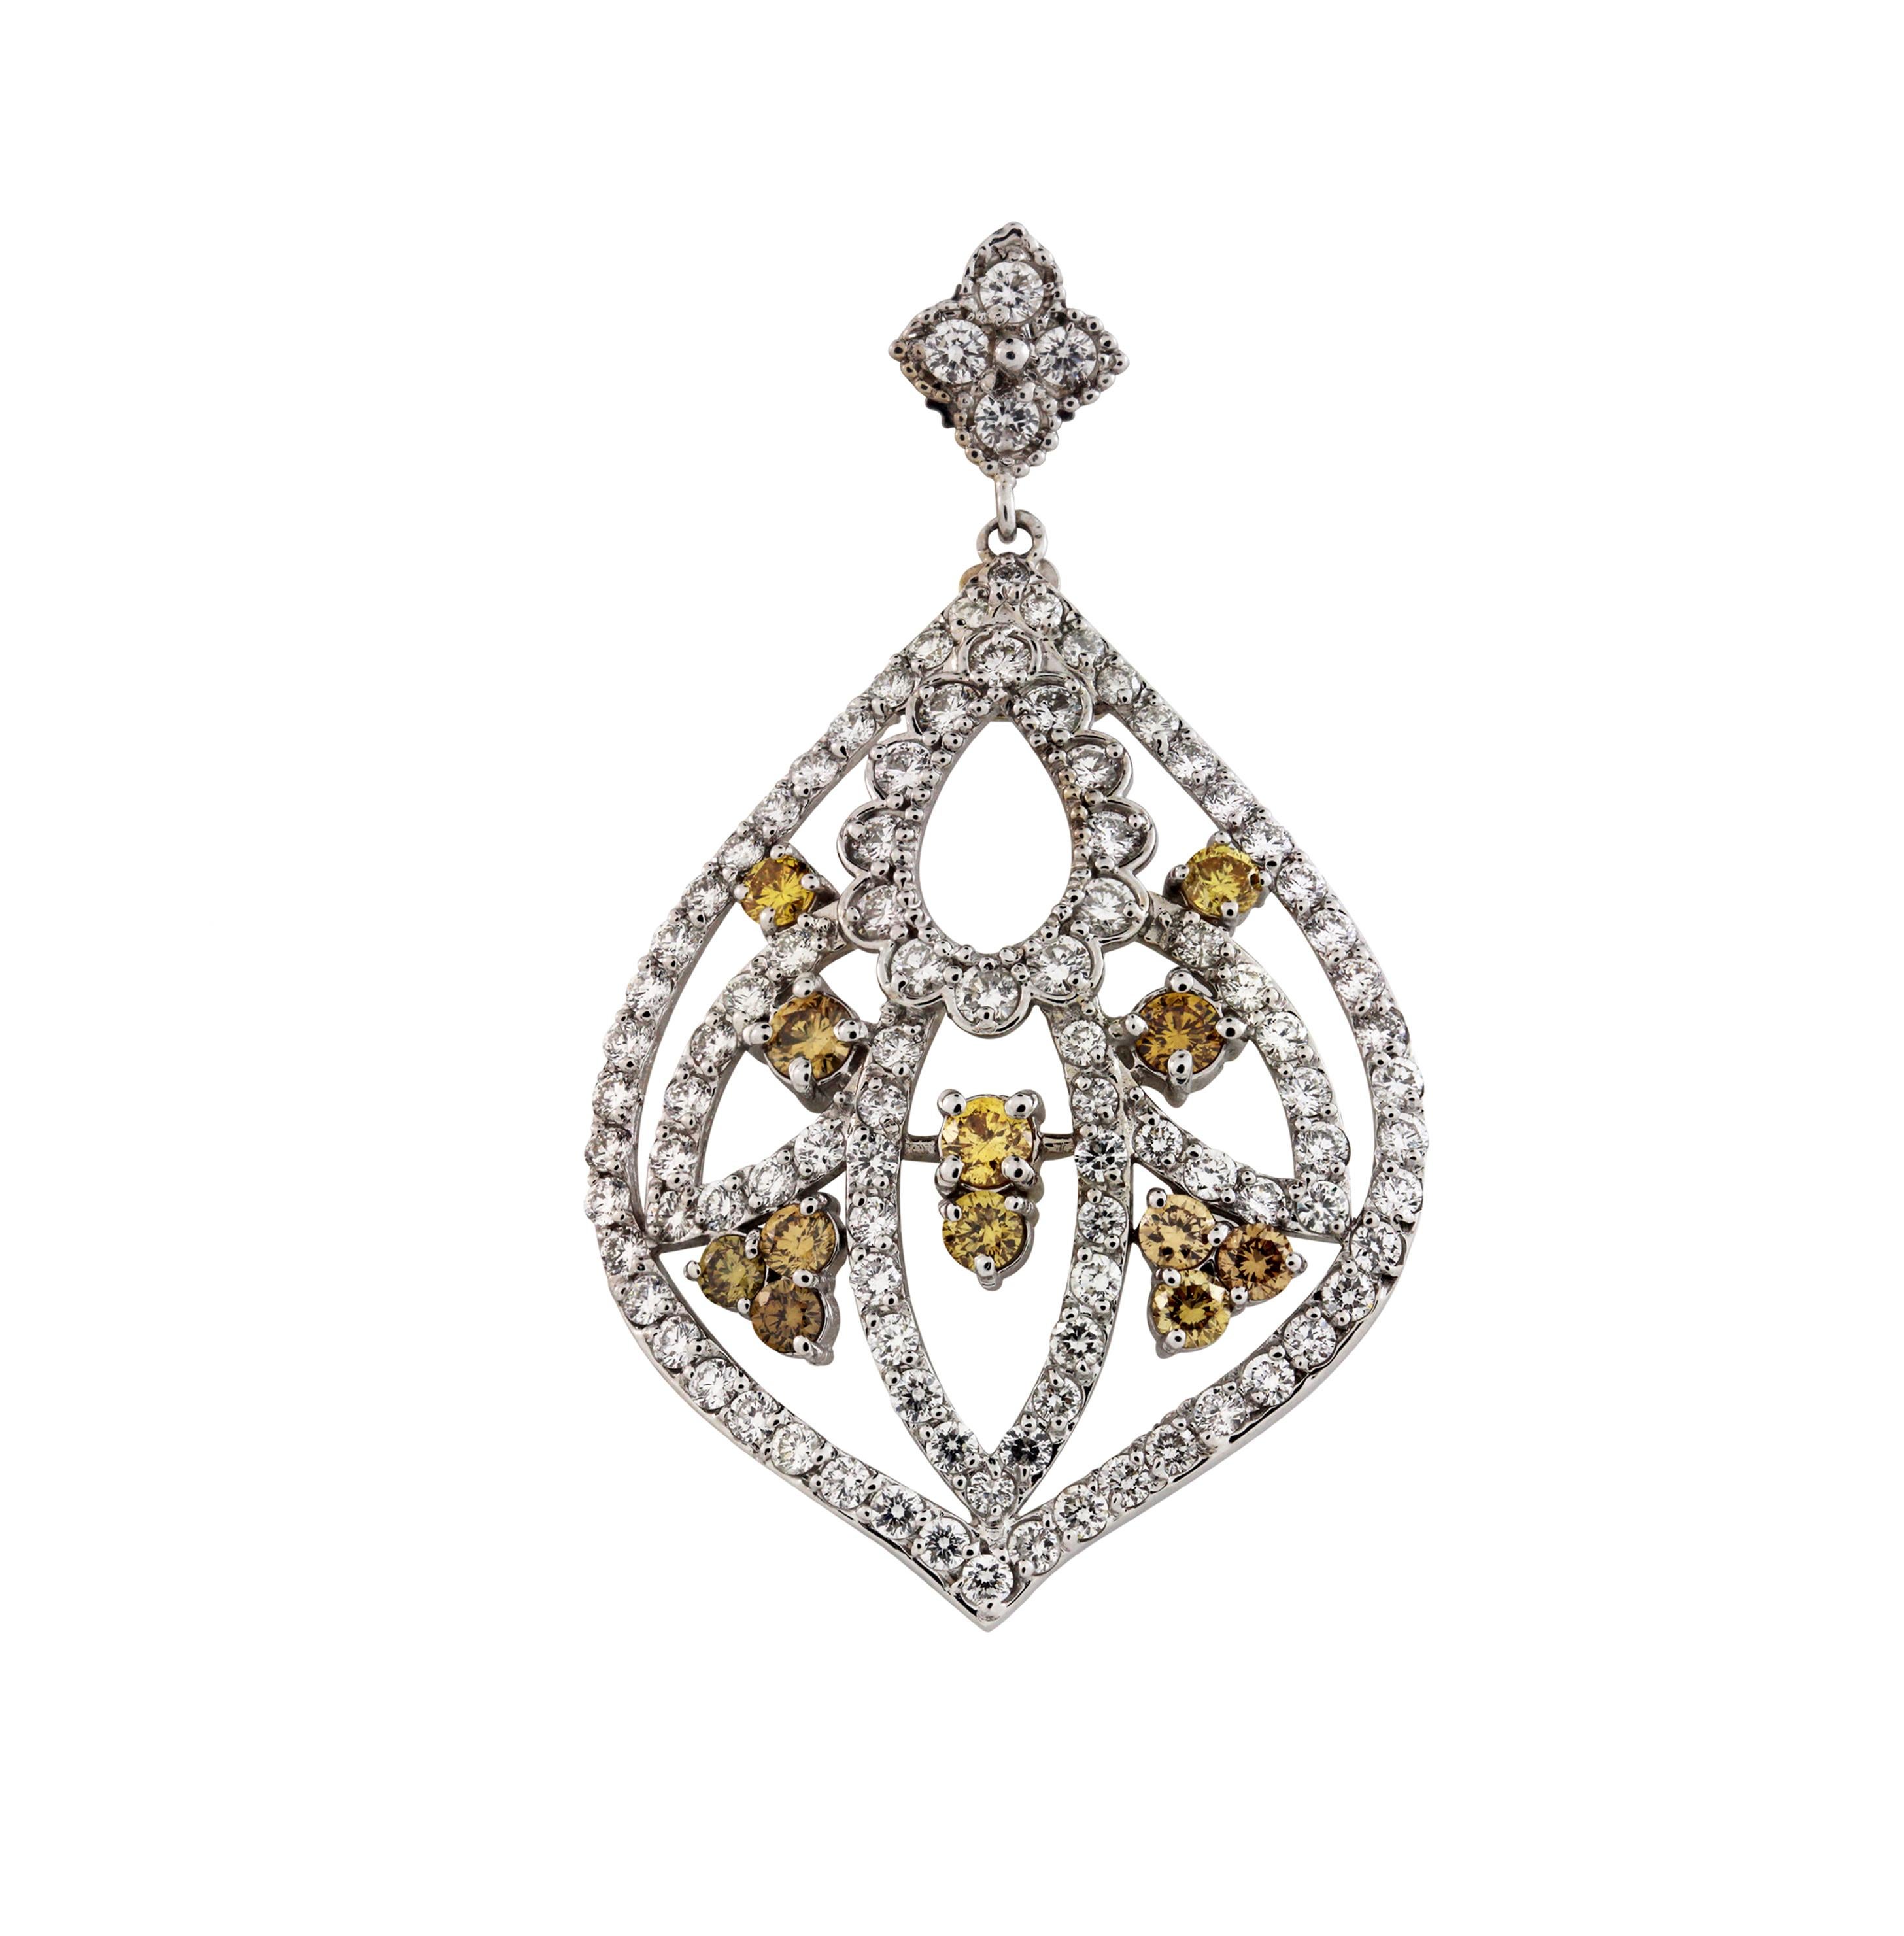 IF YOU ARE REALLY INTERESTED, CONTACT US WITH ANY REASONABLE OFFER. WE WILL TRY OUR BEST TO MAKE YOU HAPPY!

18K White Gold Yellow and White Diamond Chandelier Earrings by Stambolian

6.37 carat G color, VS clarity white diamonds

2.47 carat Canary